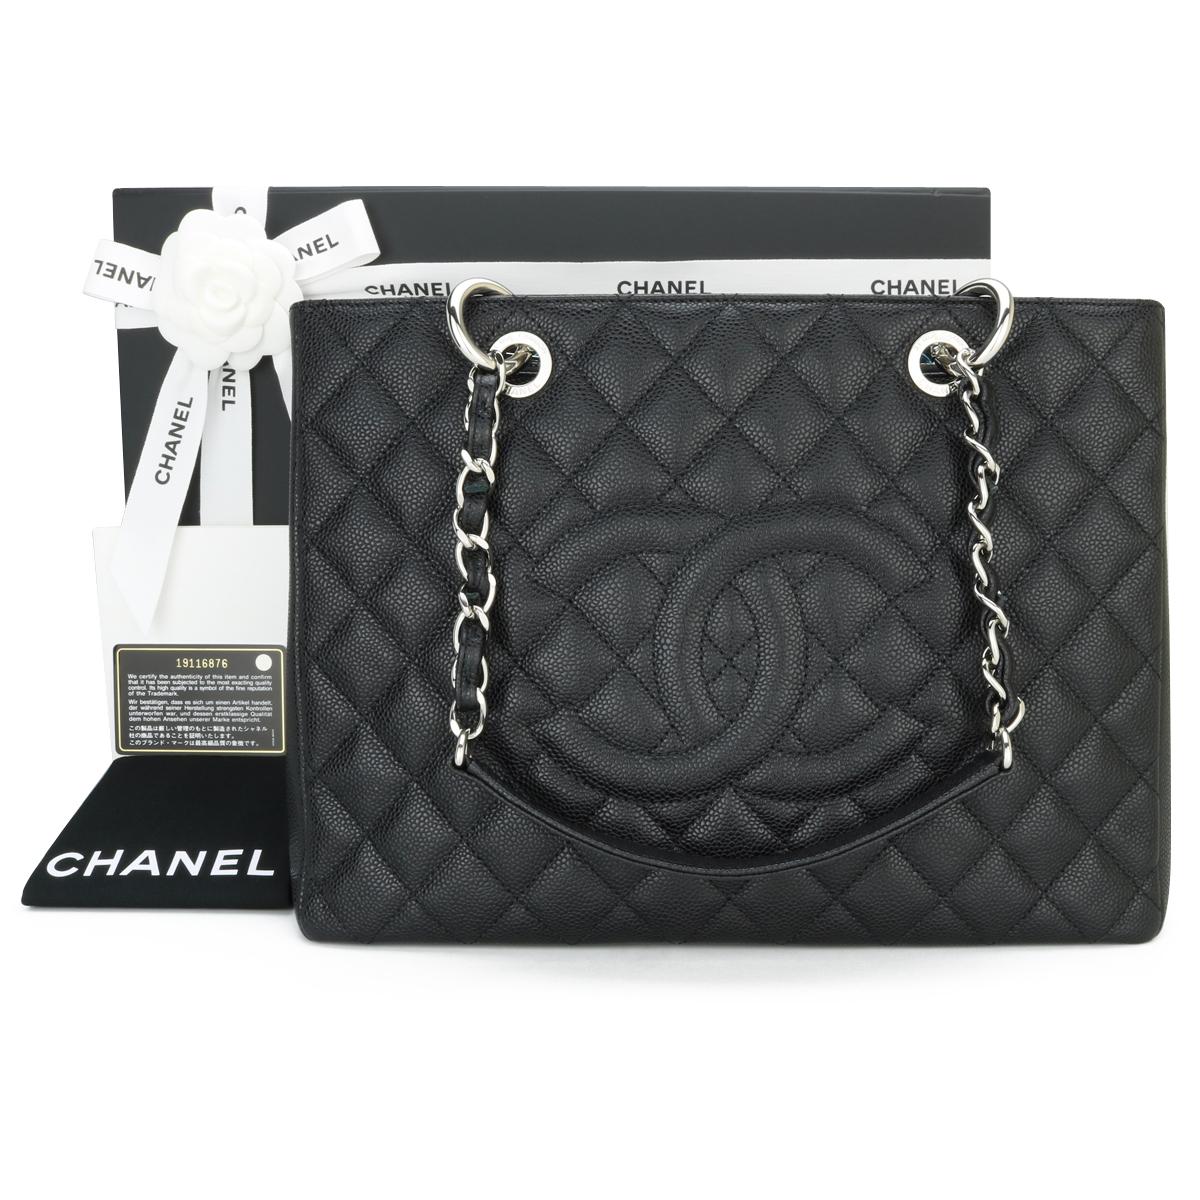 CHANEL Grand Shopping Tote (GST) Black Caviar with Silver Hardware 2015.

This bag is in pristine condition, the bag still holds its original shape, and the hardware is still very shiny.

As Chanel has discontinued the Grand Shopping Tote (GST), it